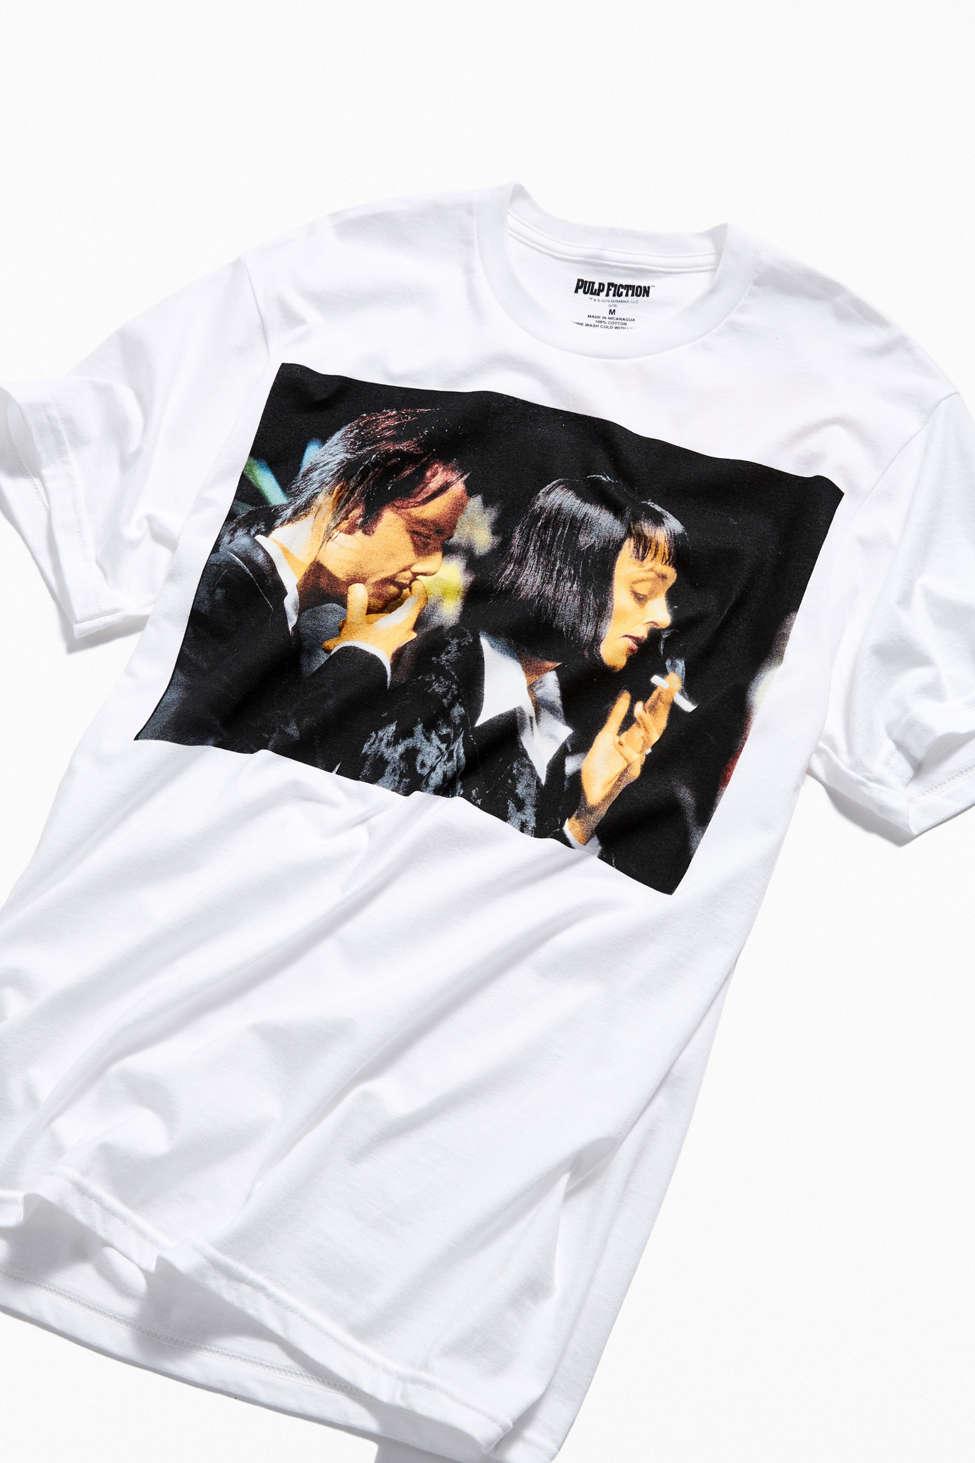 Urban Outfitters Cotton Pulp Fiction Tee for Men - Lyst